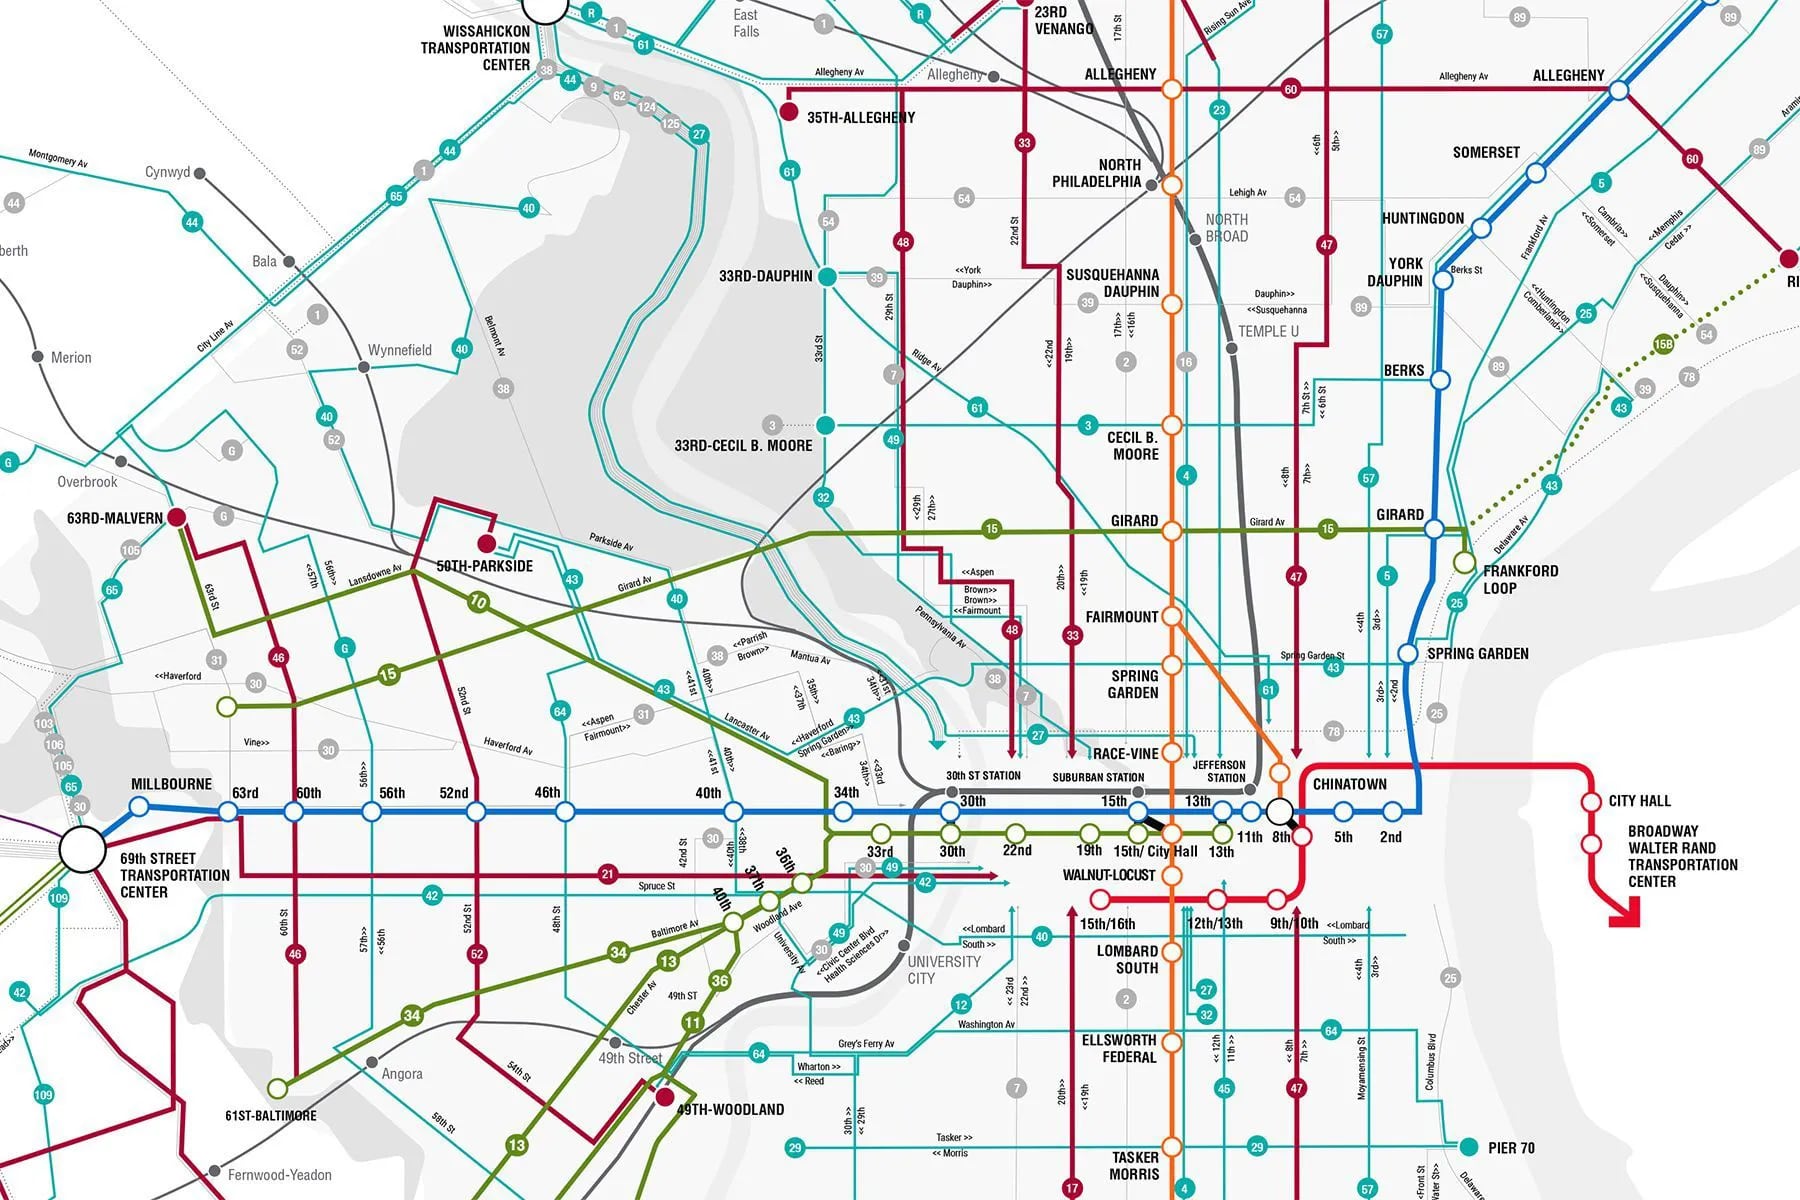 SEPTA's new bus system map uses color and lines of different thickness...